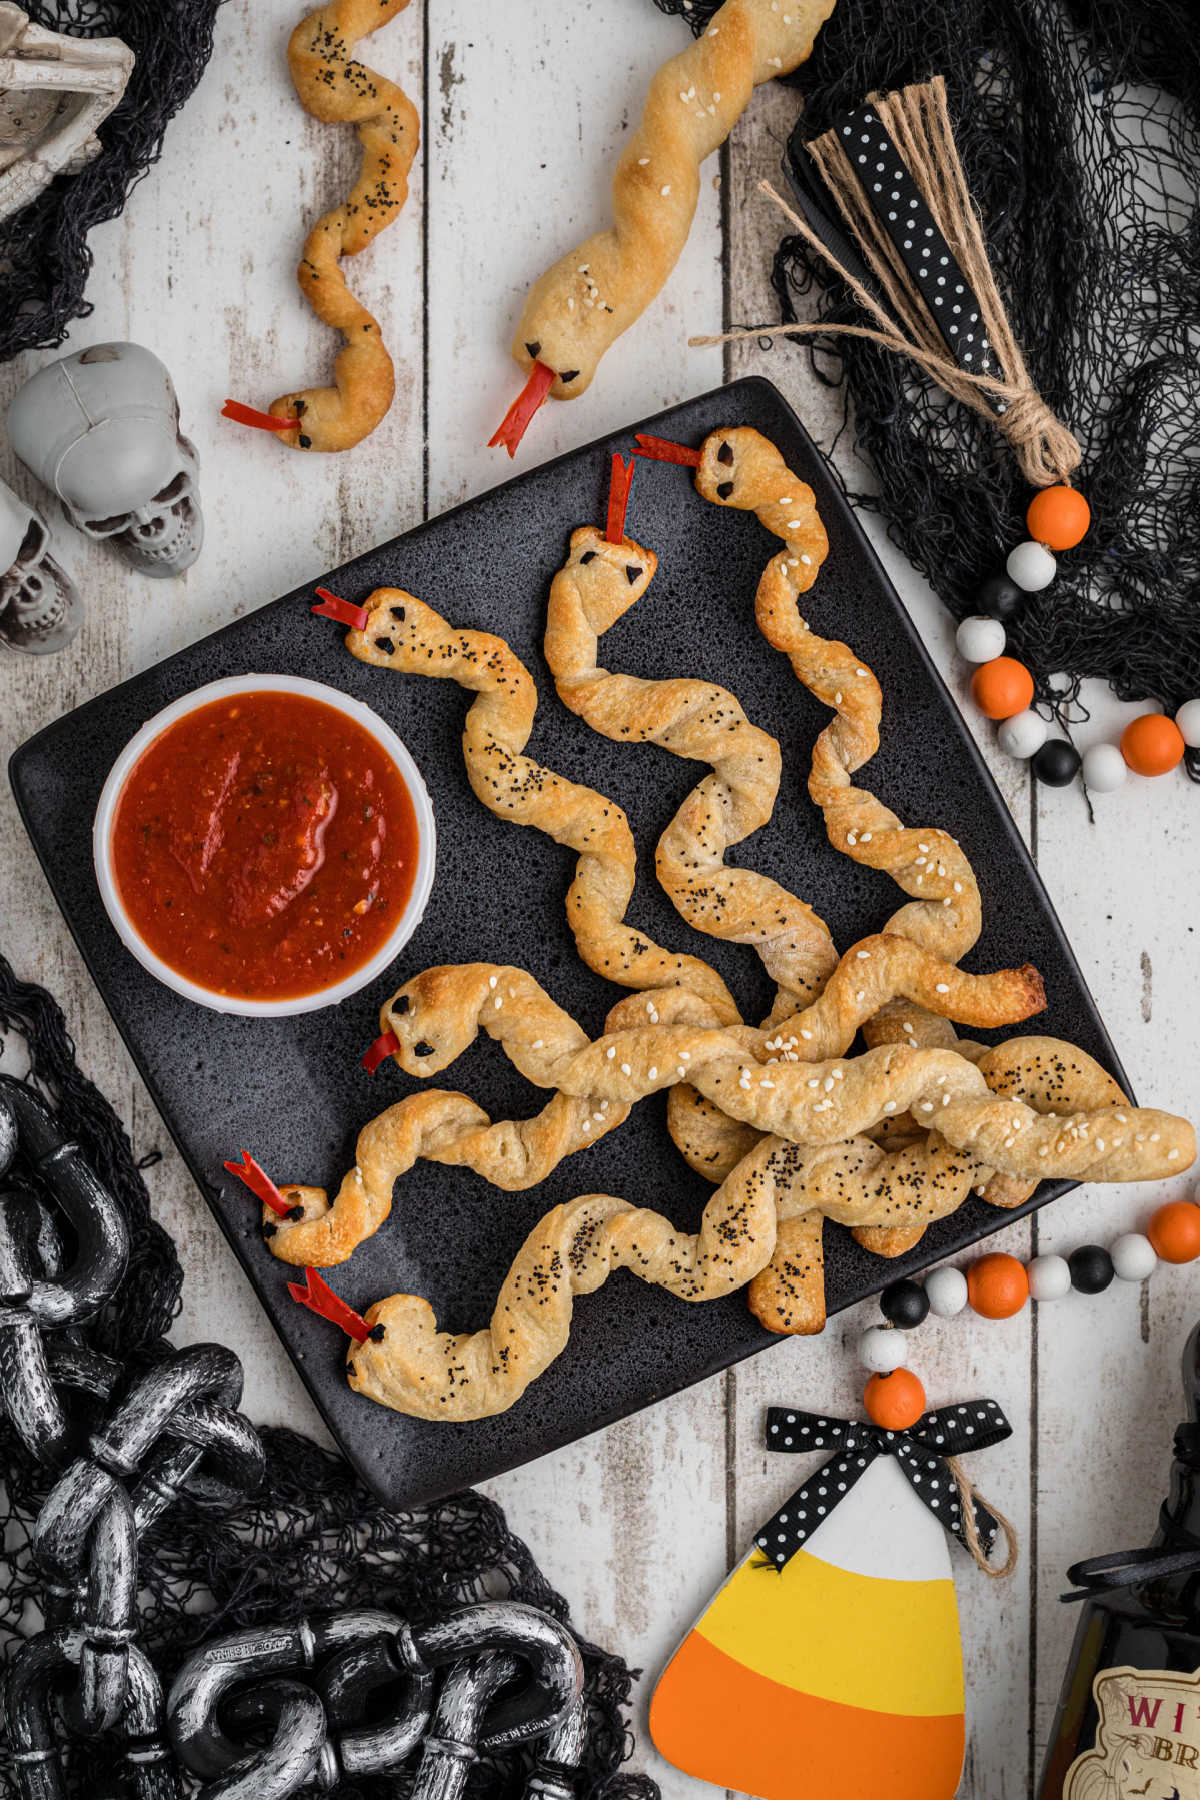 Breadstick rattlers on a plate with Halloween decorations all around.